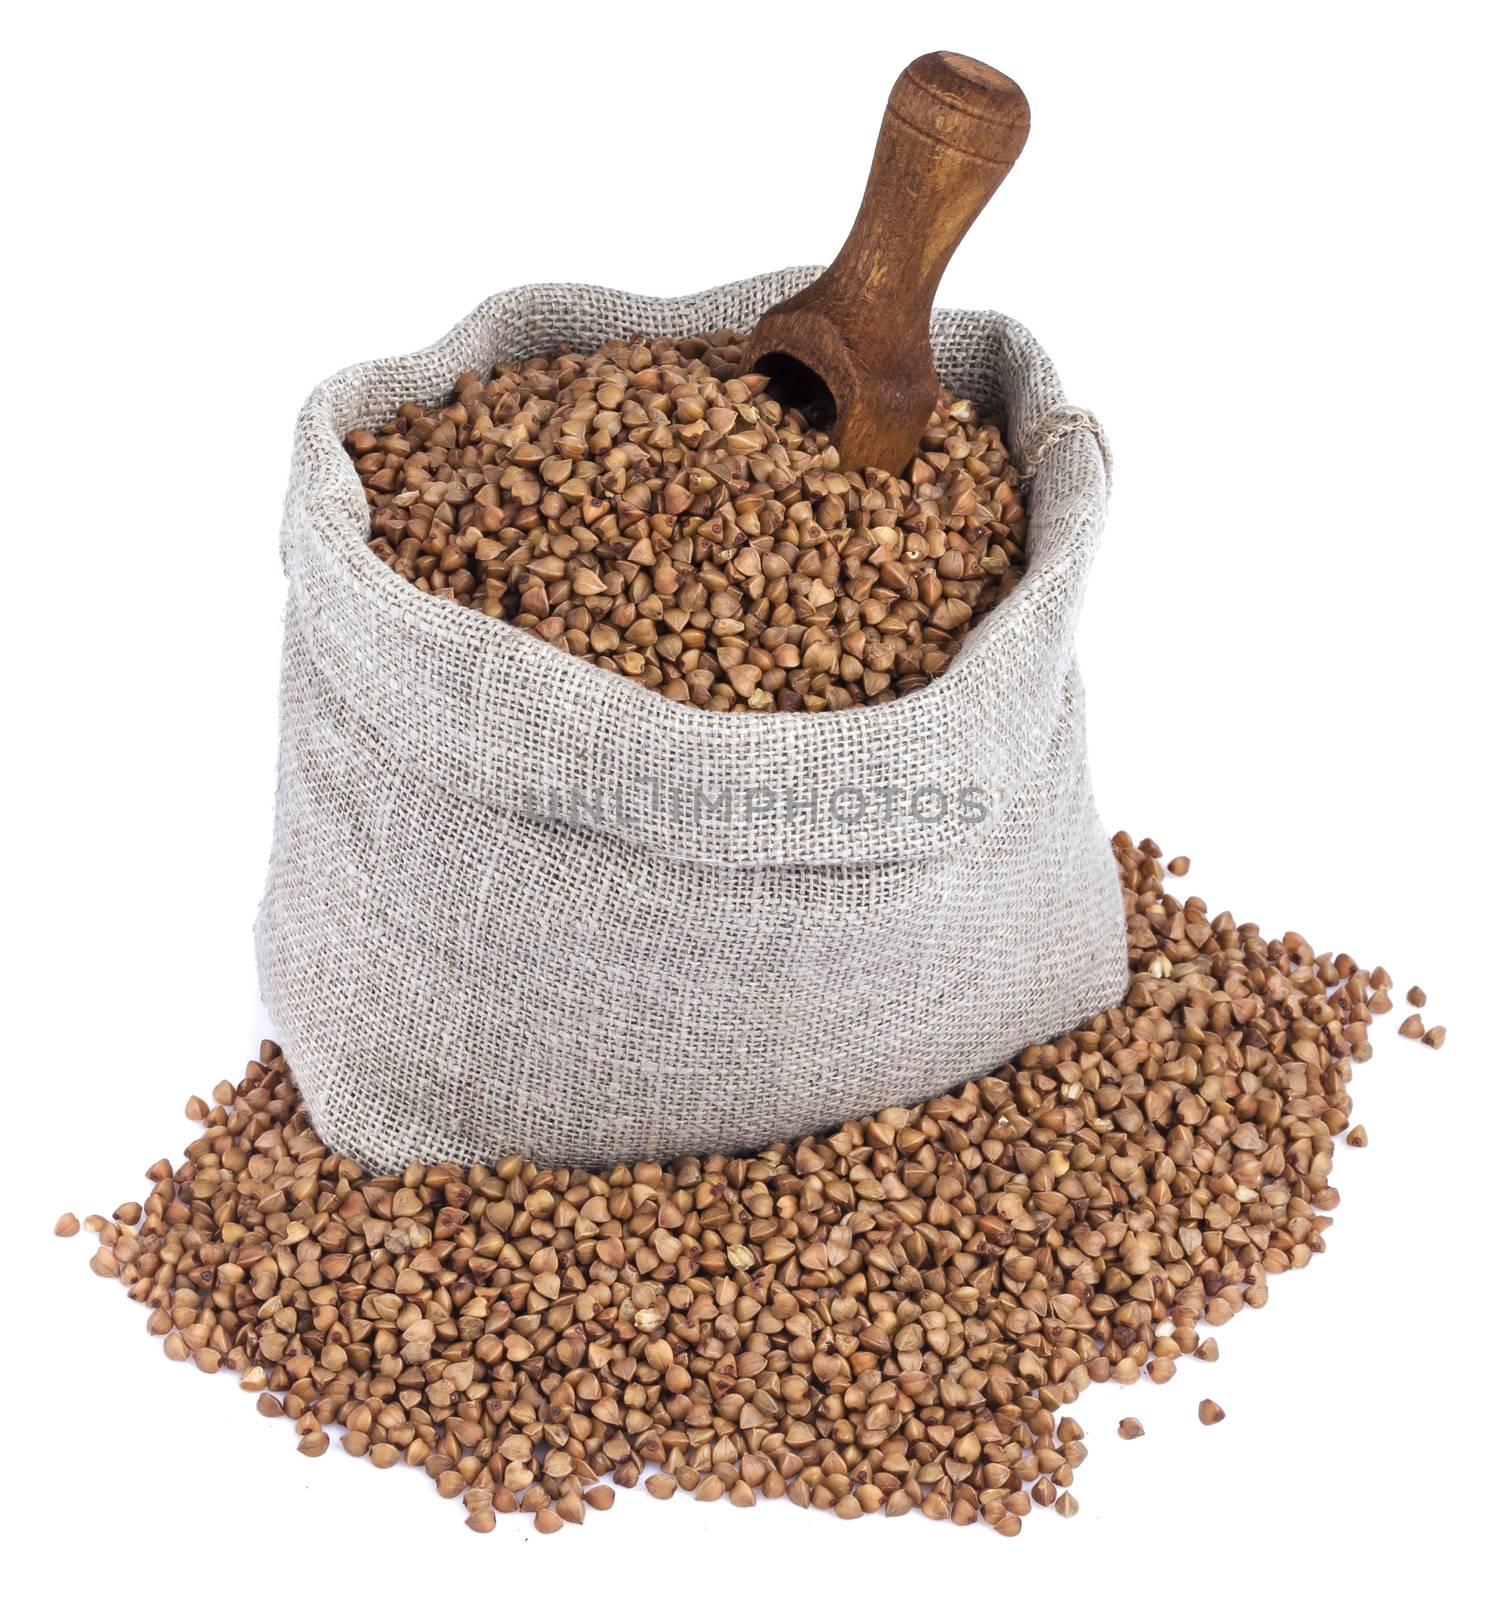 Buckwheat in bag isolated on white background with clipping path. Closeup